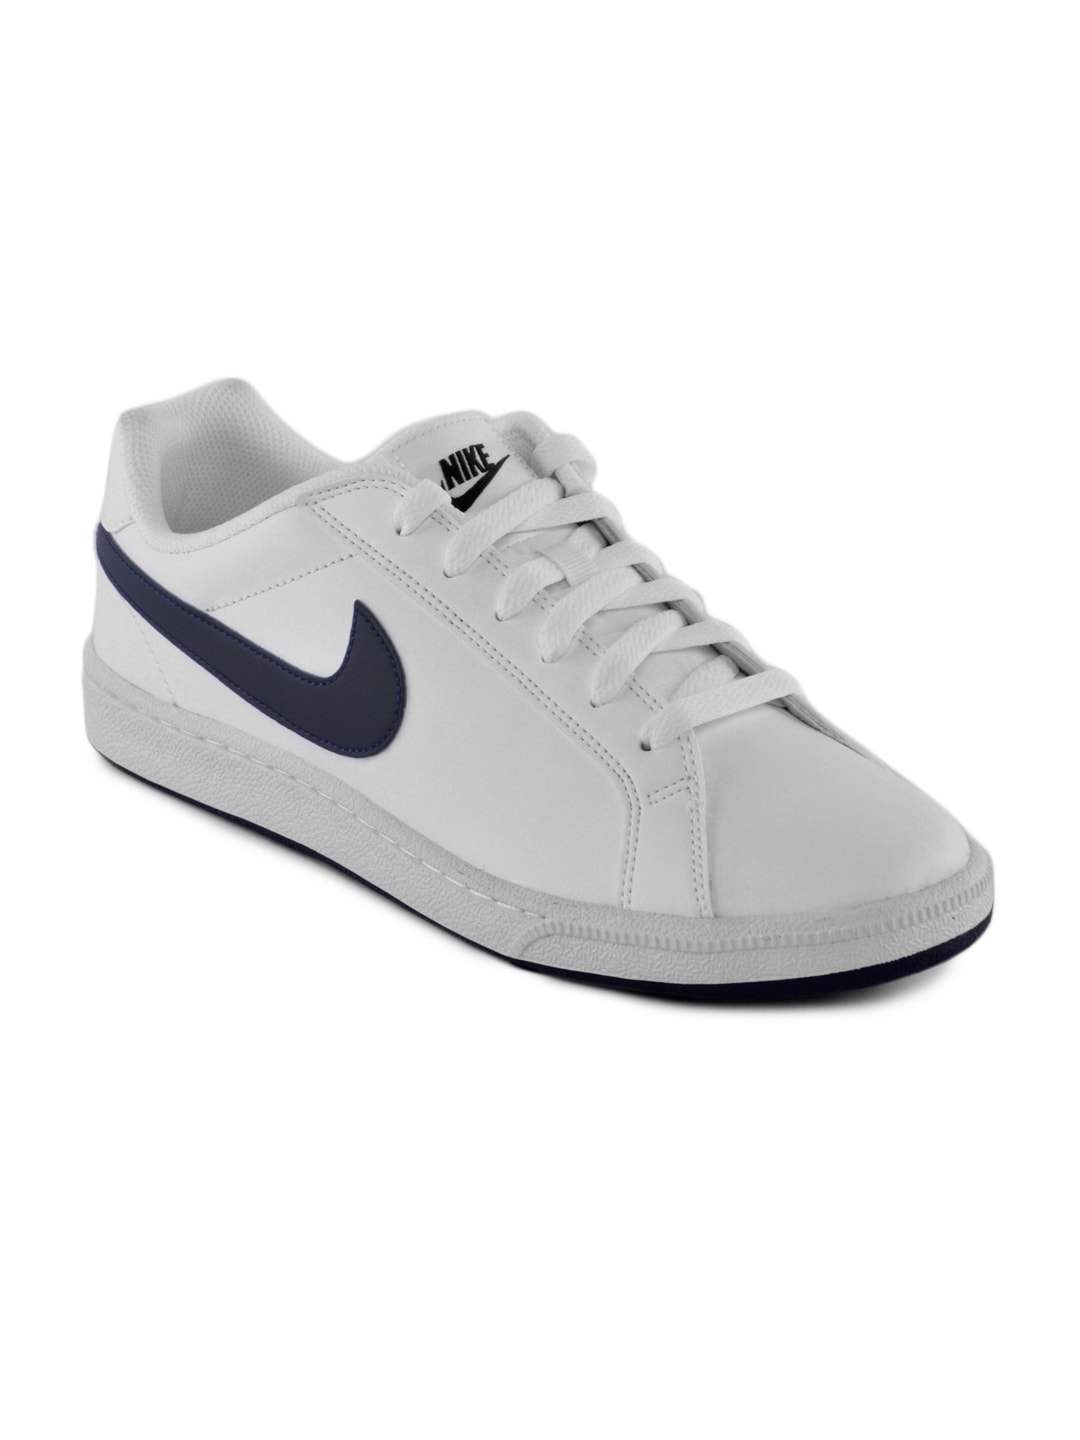 Nike Men Court Majestic White Casual Shoes